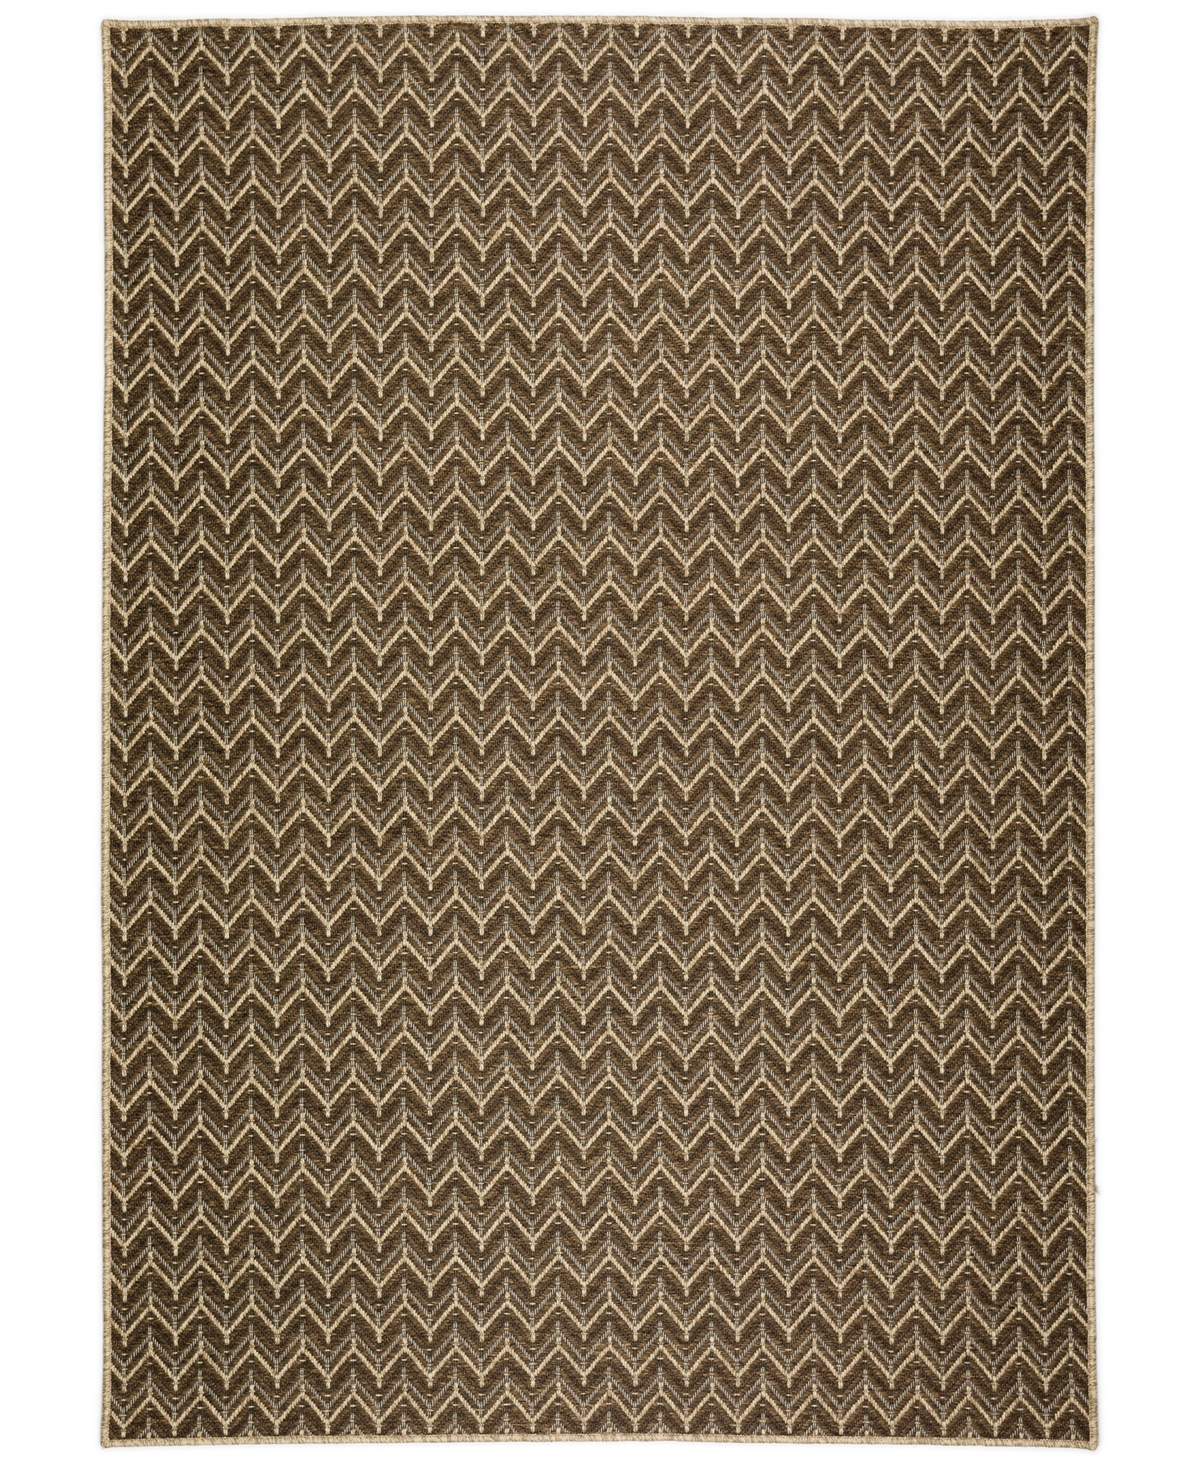 D Style Nusa Outdoor Nsa1 1'8" X 2'6" Area Rug In Chocolate